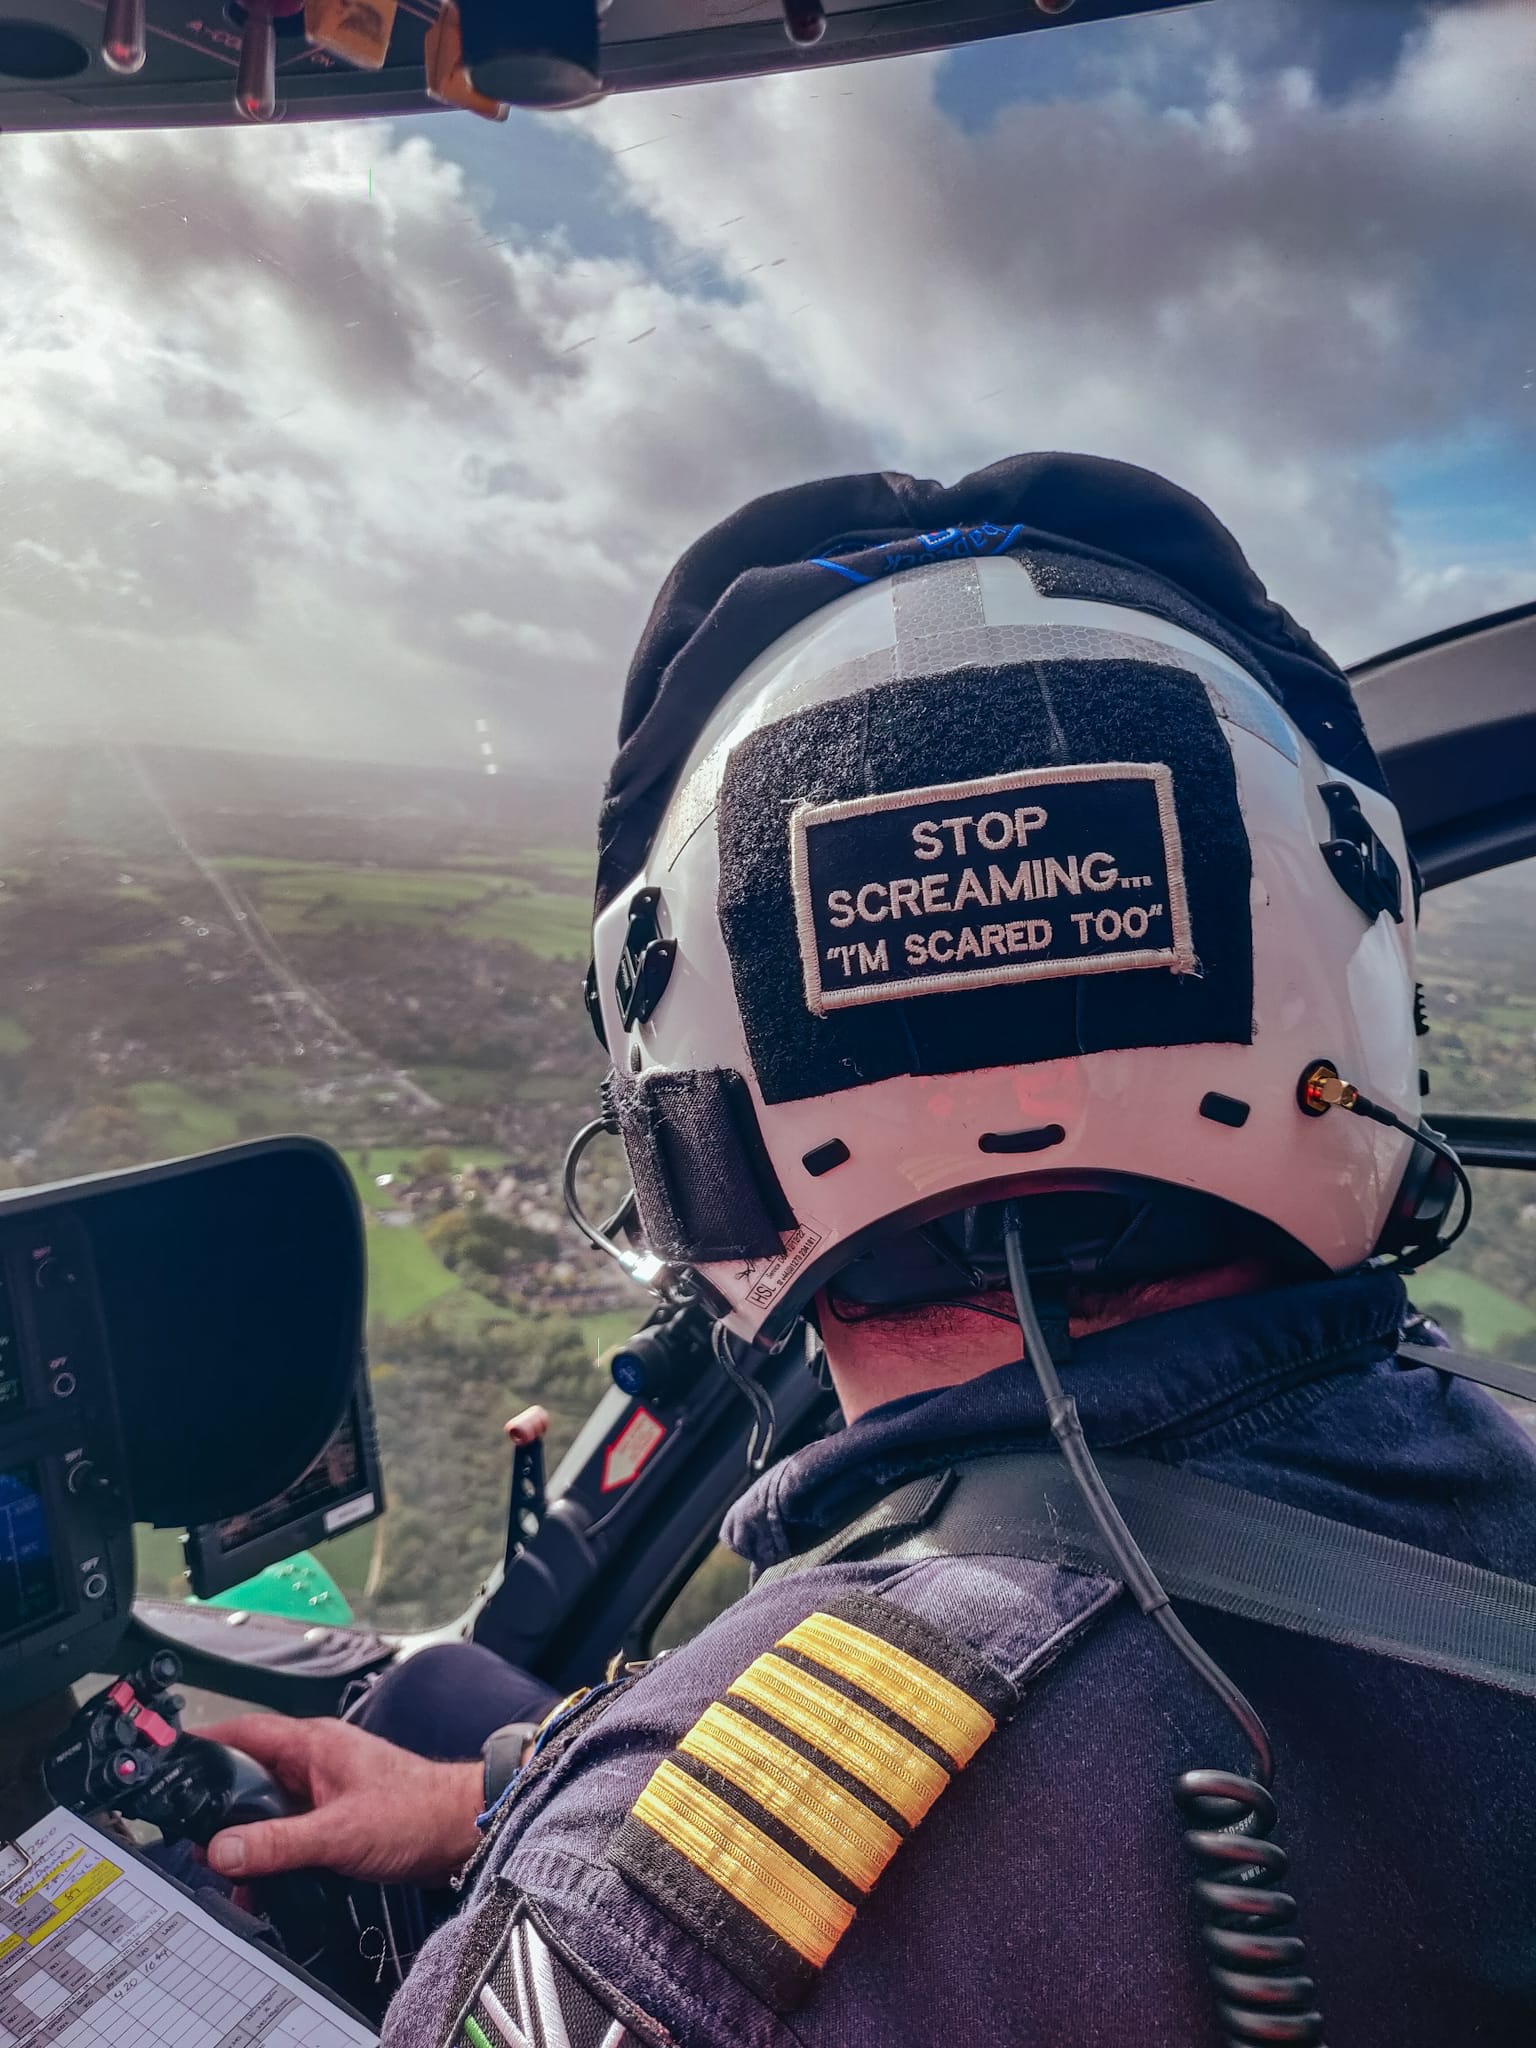 A helicopter pilot with a sign reading "Stop screaming... I'm scared too".